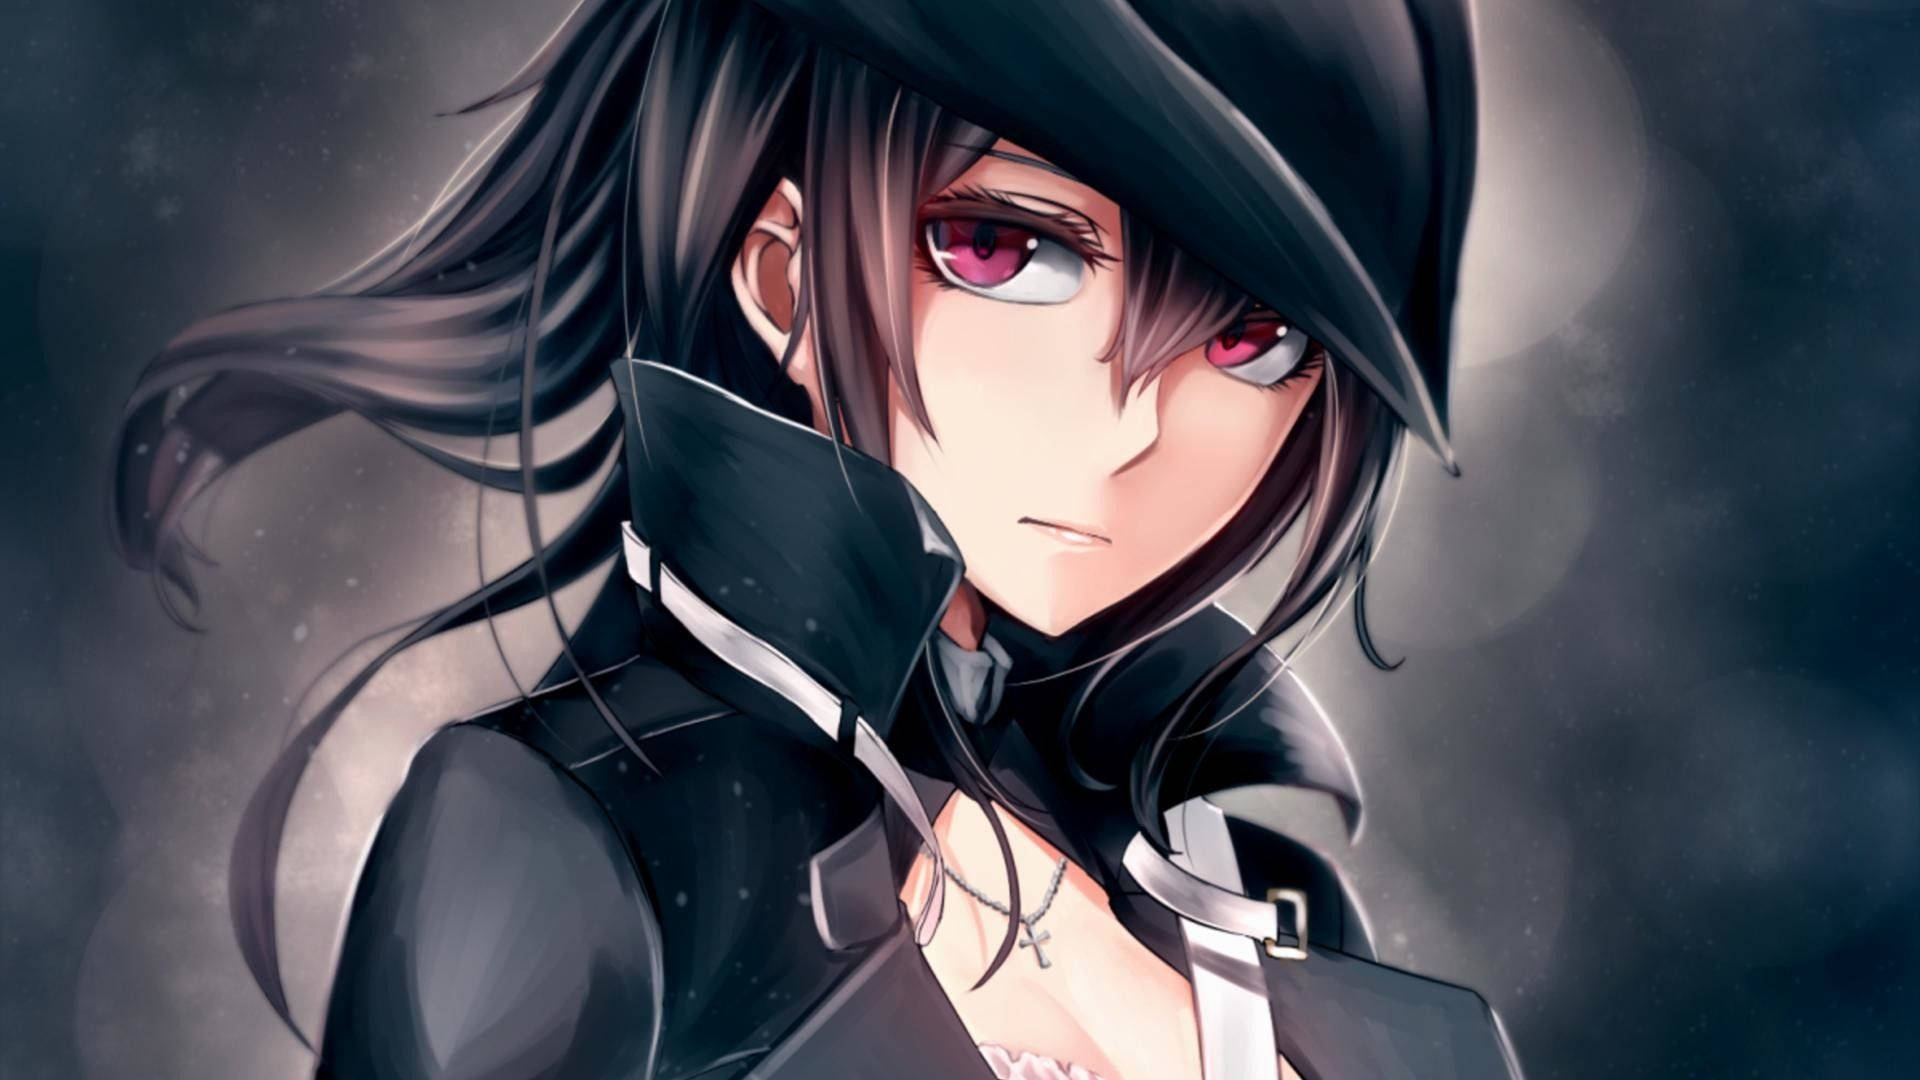 Badass anime girl wearing black leather clothes and a hat wallpaper